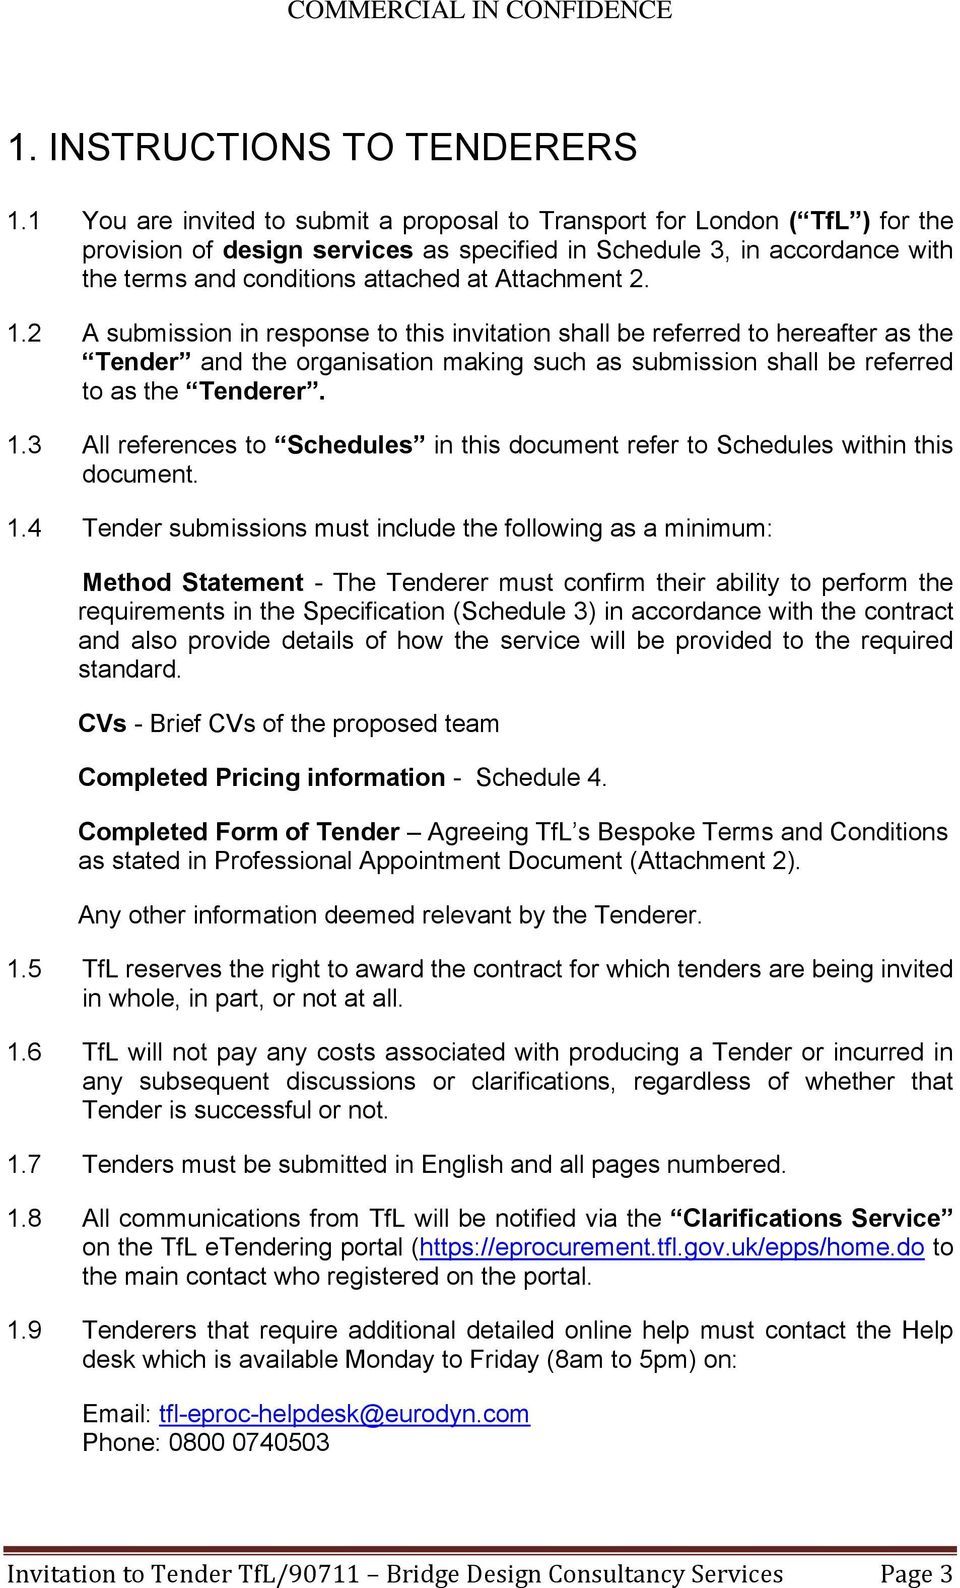 Attachment 2. 1.2 A submission in response to this invitation shall be referred to hereafter as the Tender and the organisation making such as submission shall be referred to as the Tenderer. 1.3 All references to Schedules in this document refer to Schedules within this document.